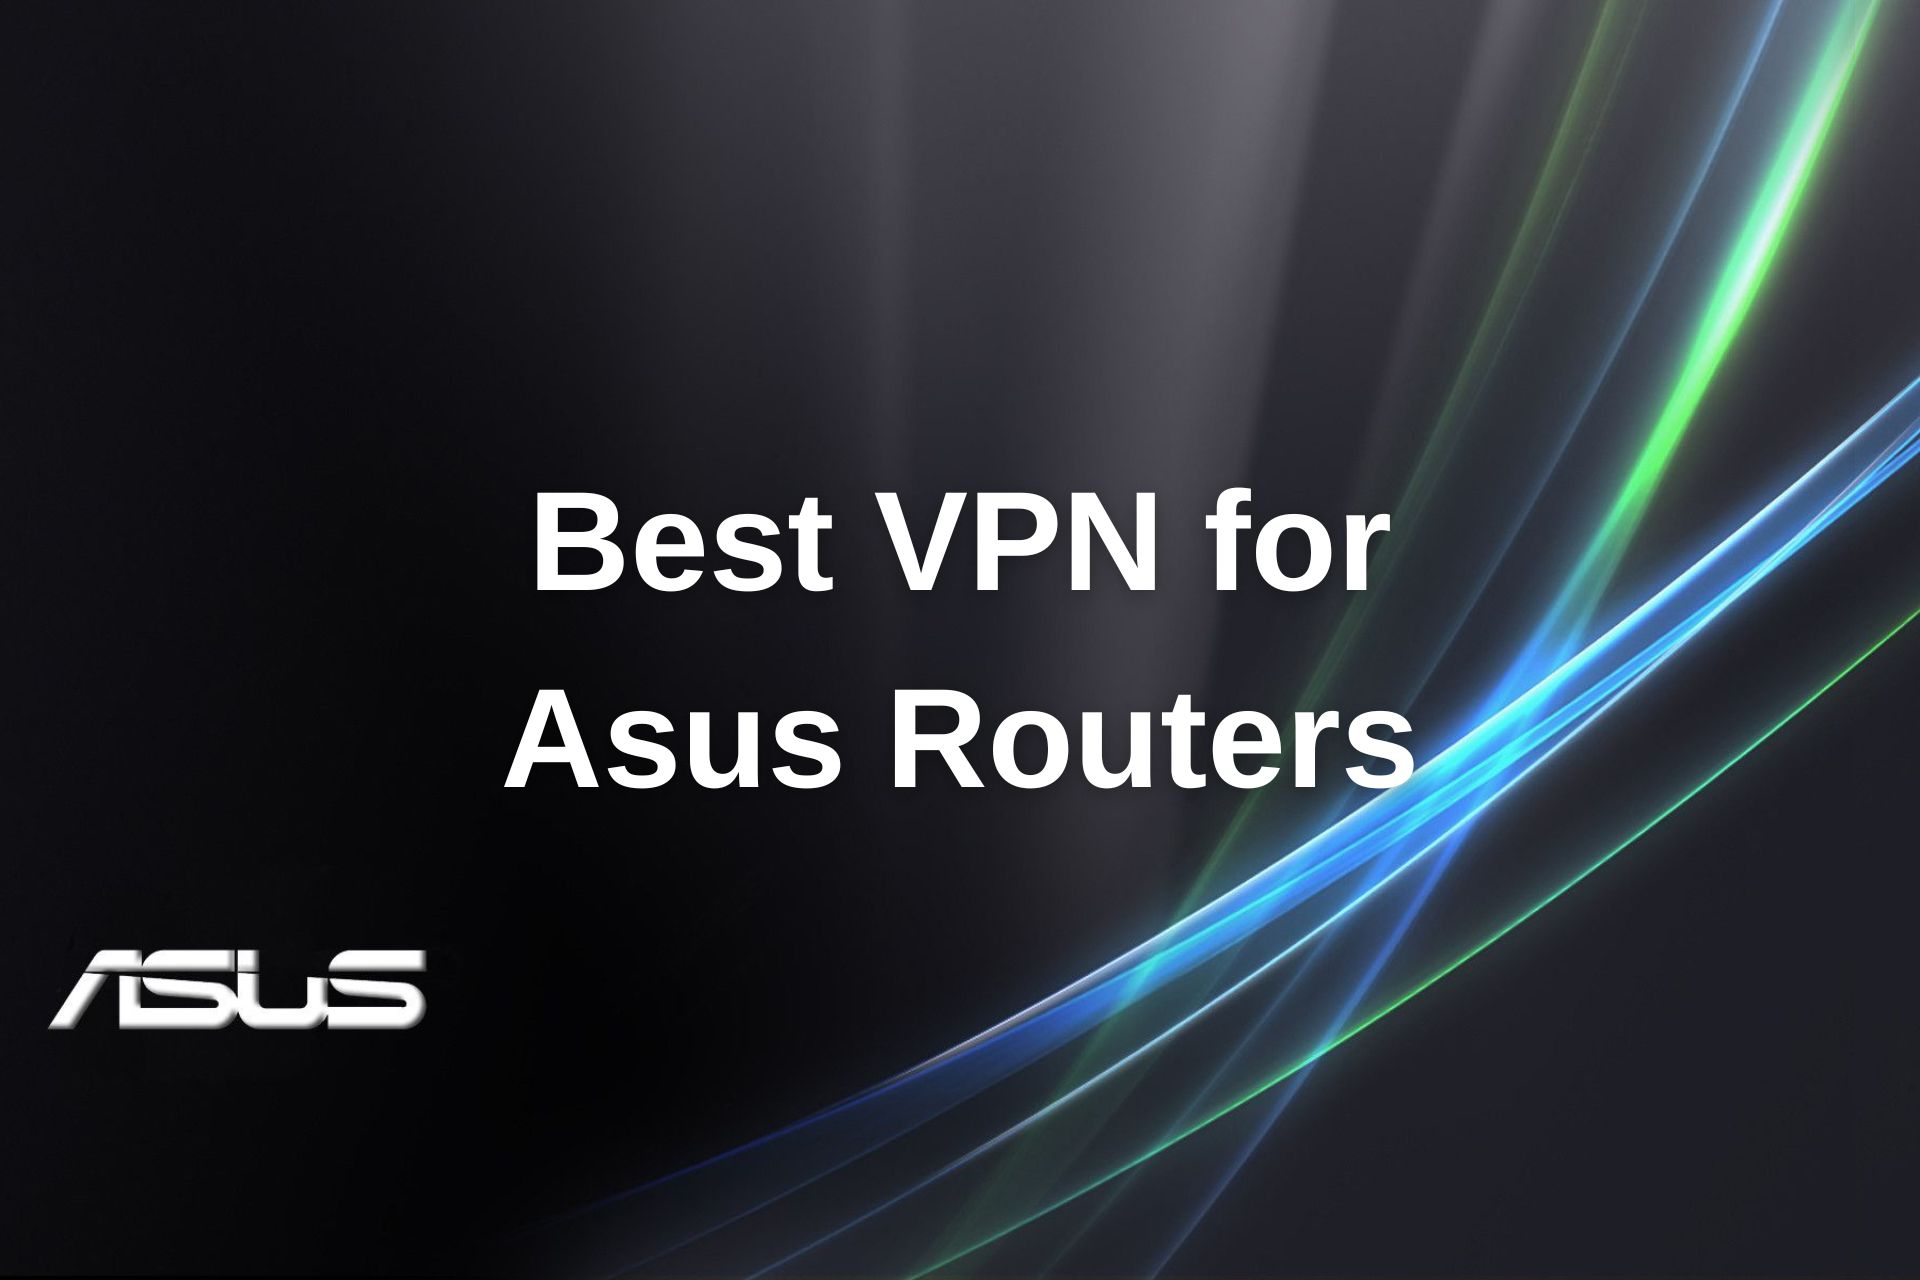 Best VPN for Asus Routers